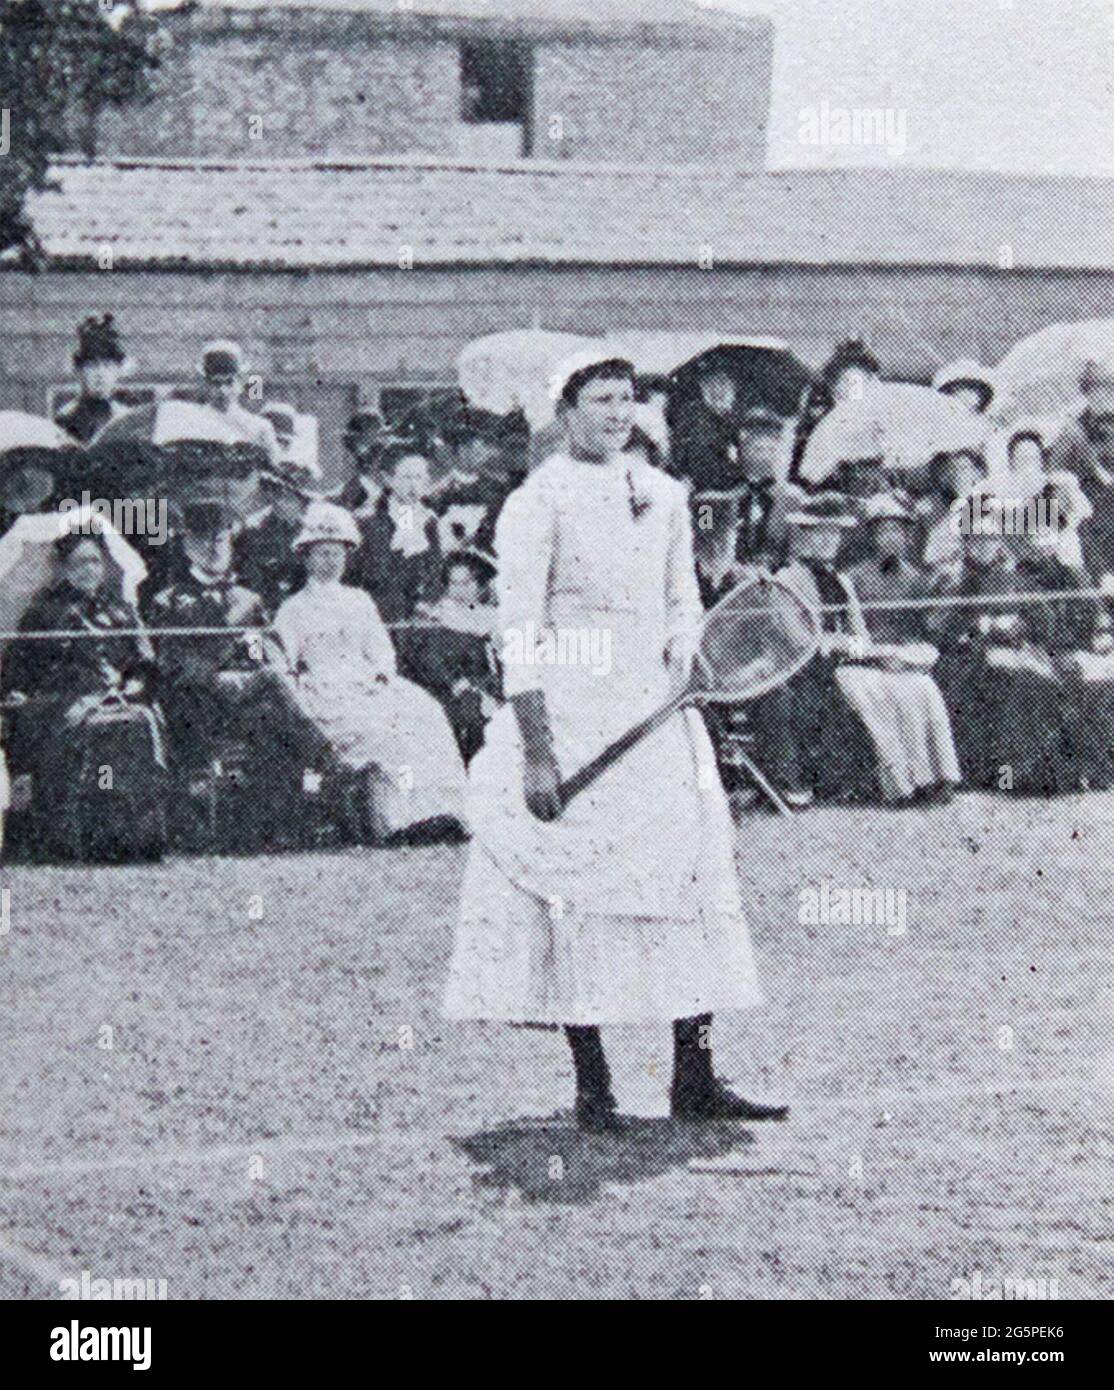 LOTTIE DOD (1871-1960) English sport swoman who excelled at tennis, archery and golf Stock Photo